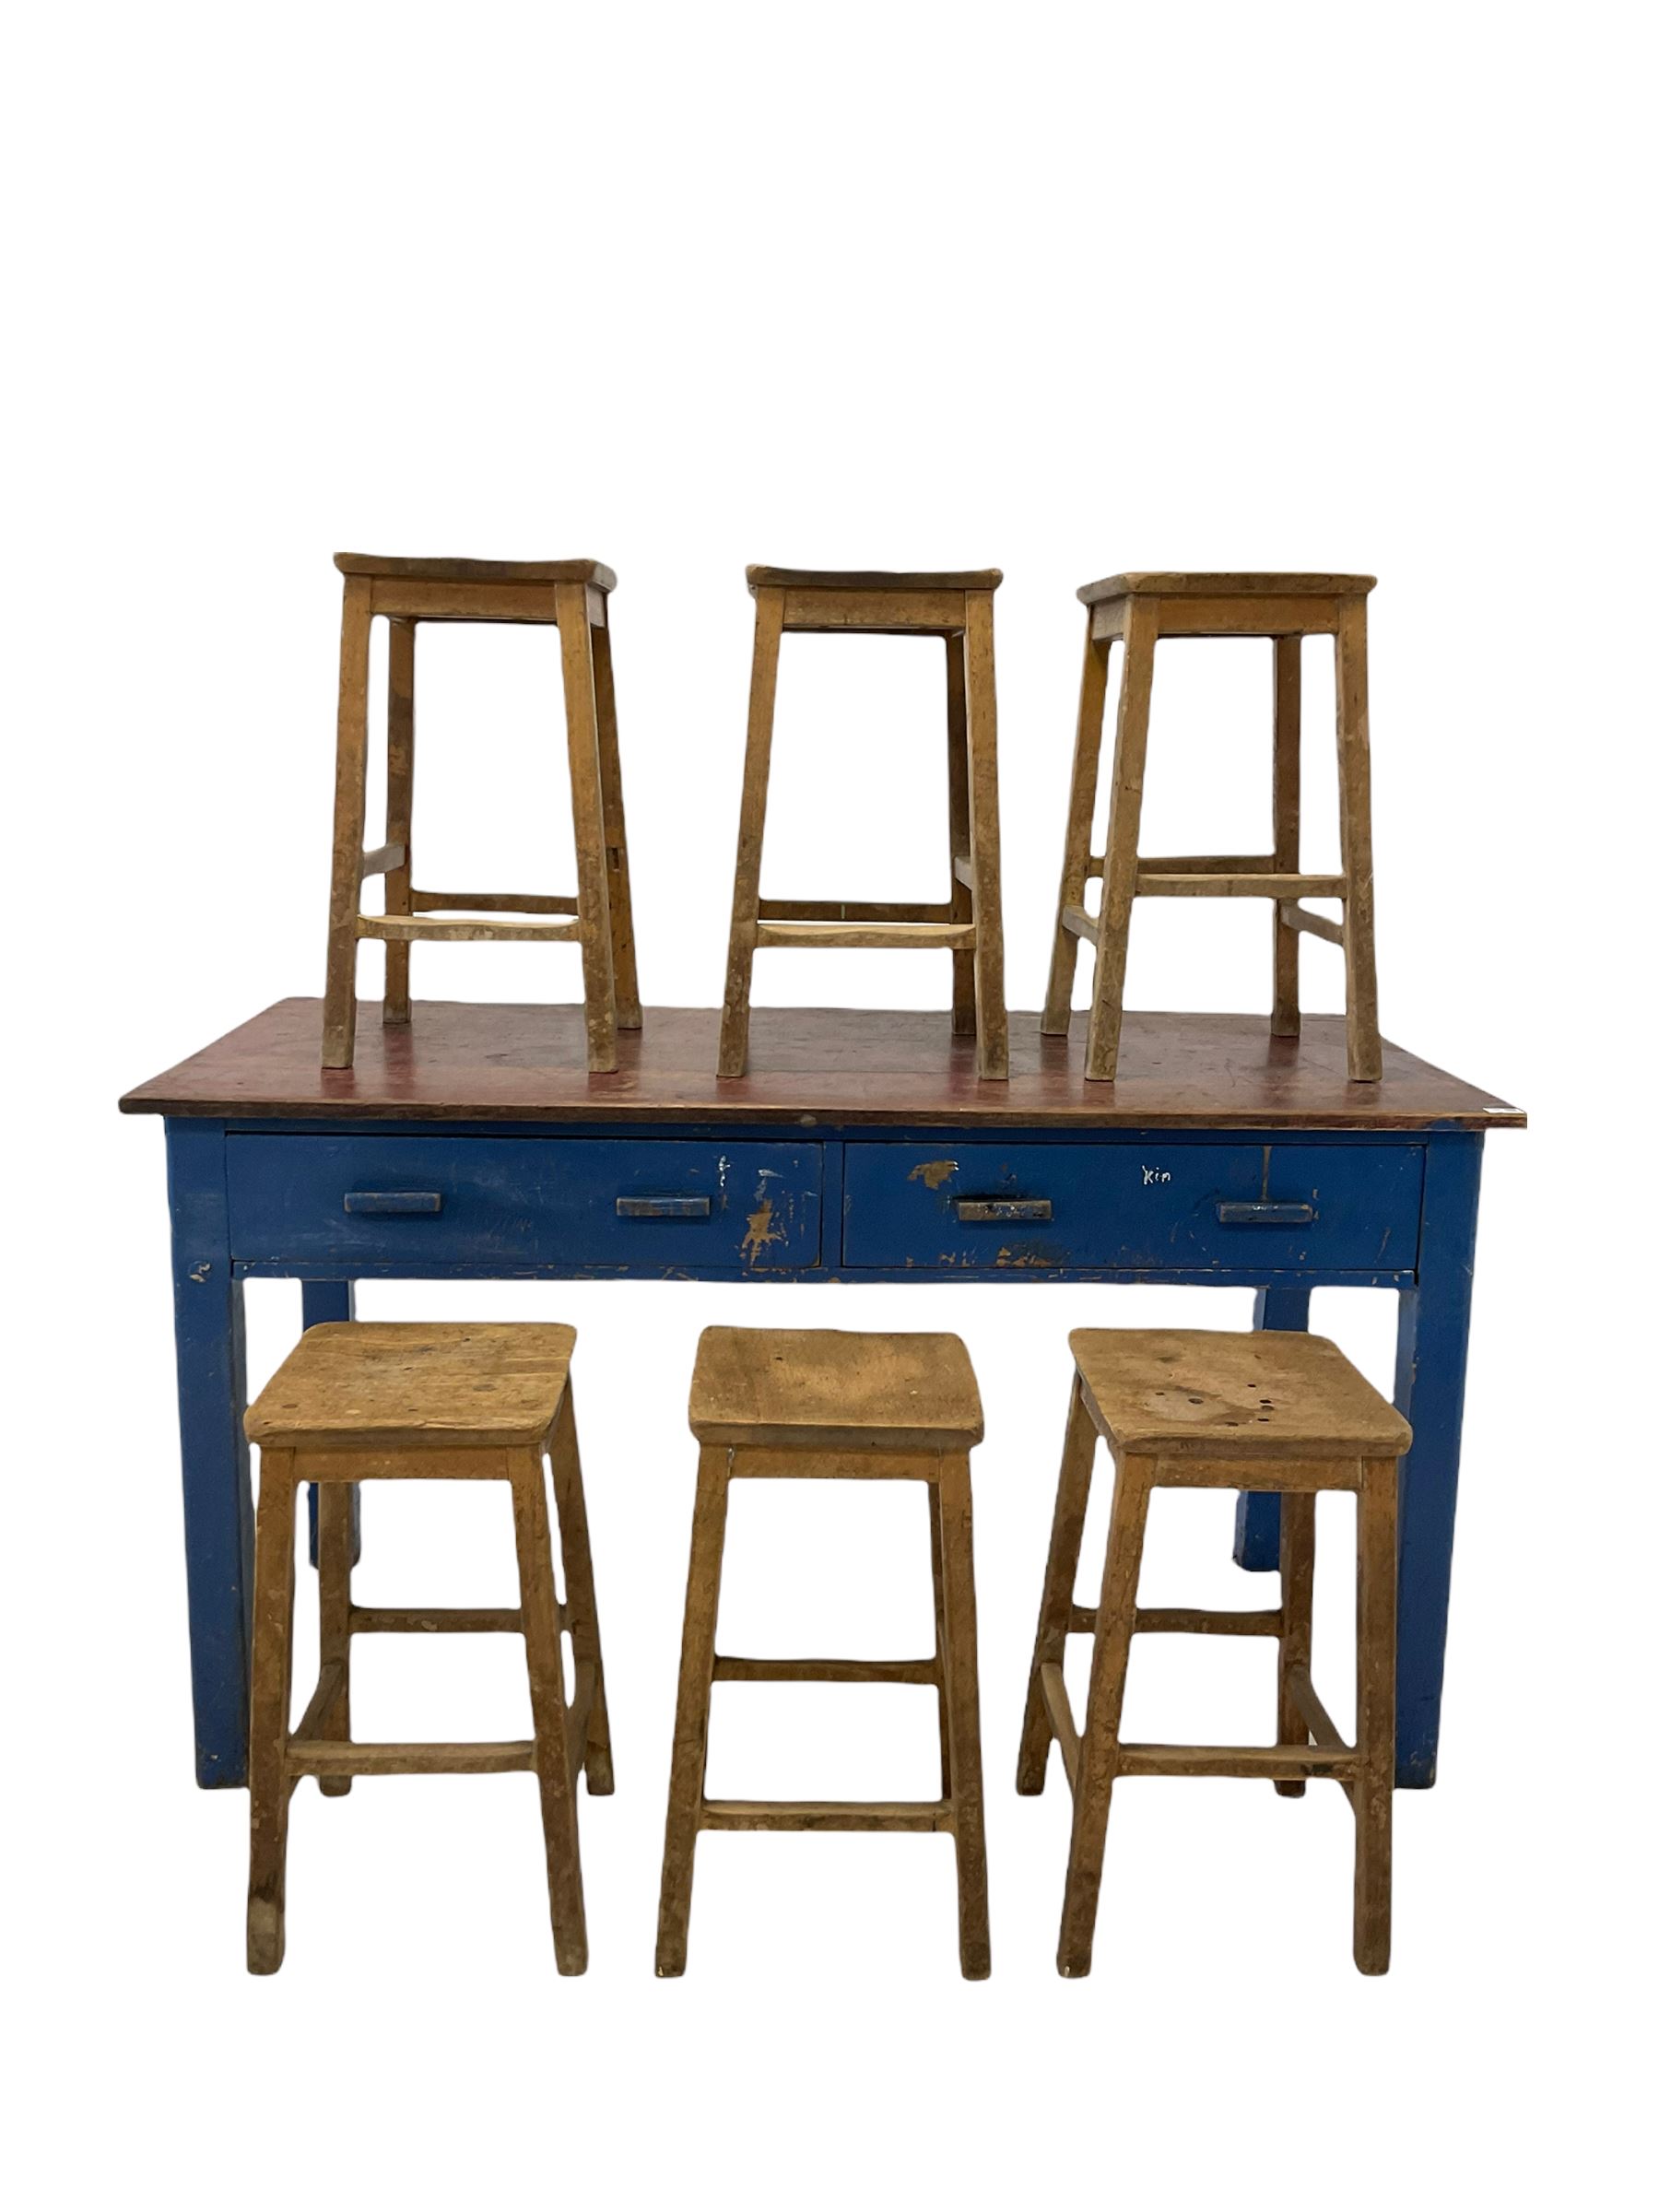 Early to mid 20th century hardwood school laboratory table - Image 2 of 4